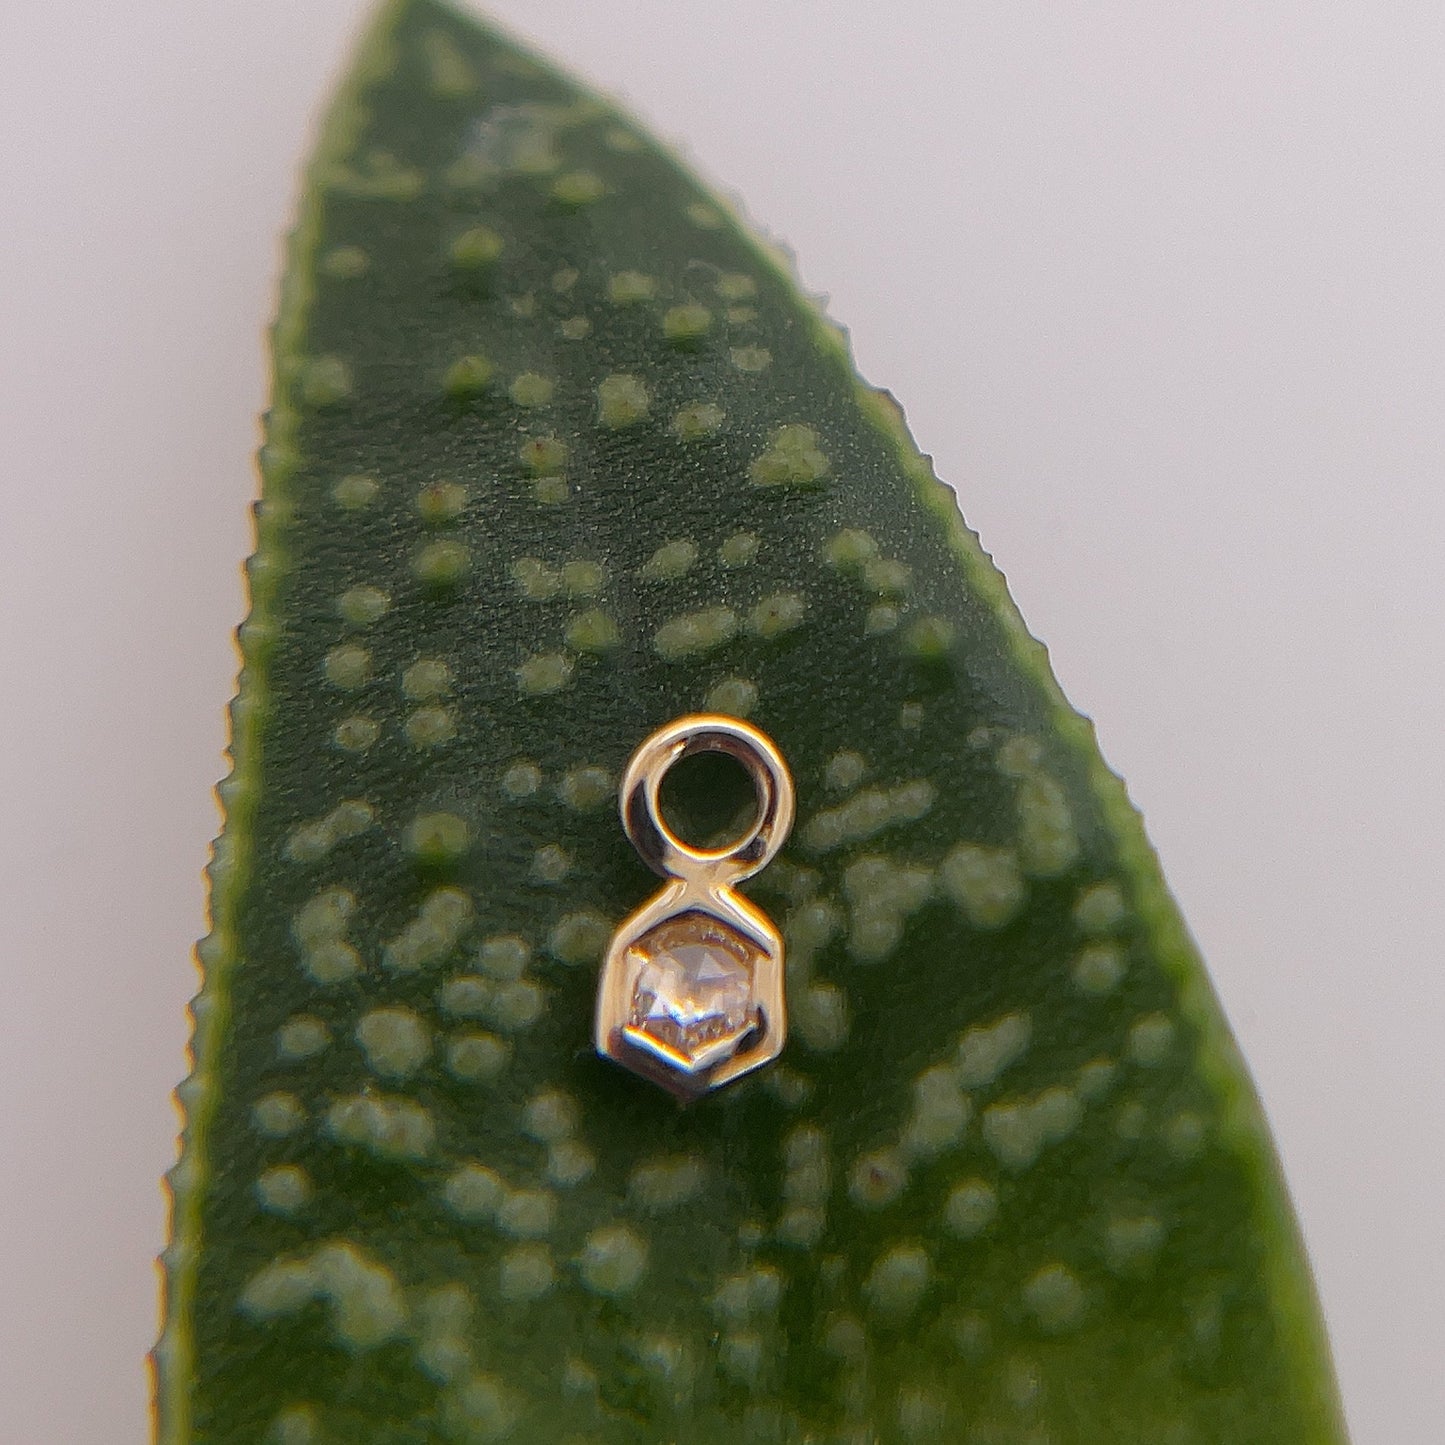 16g Charm with Honeycomb - Agave in Bloom